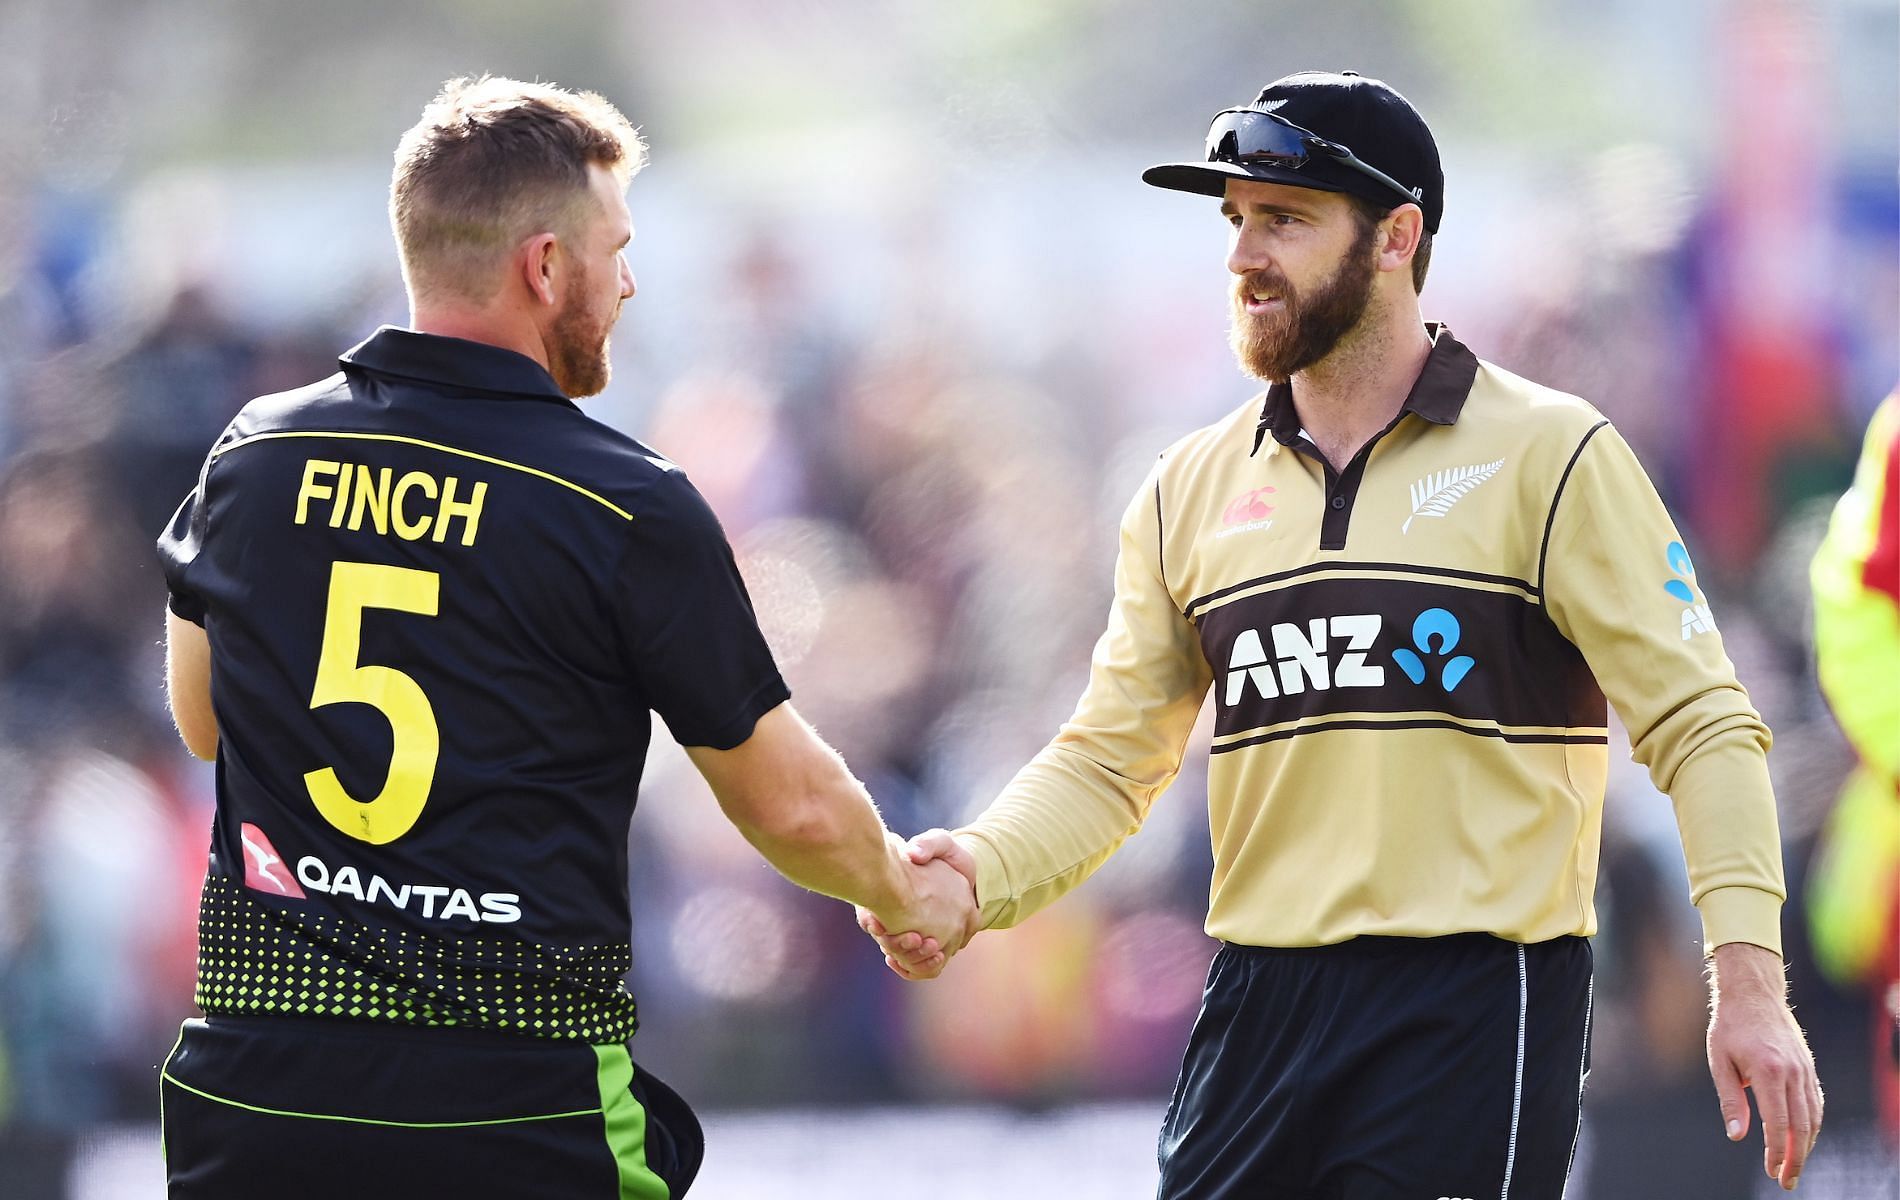 Australia and New Zealand are set to face off in the 2021 T20 World Cup final.